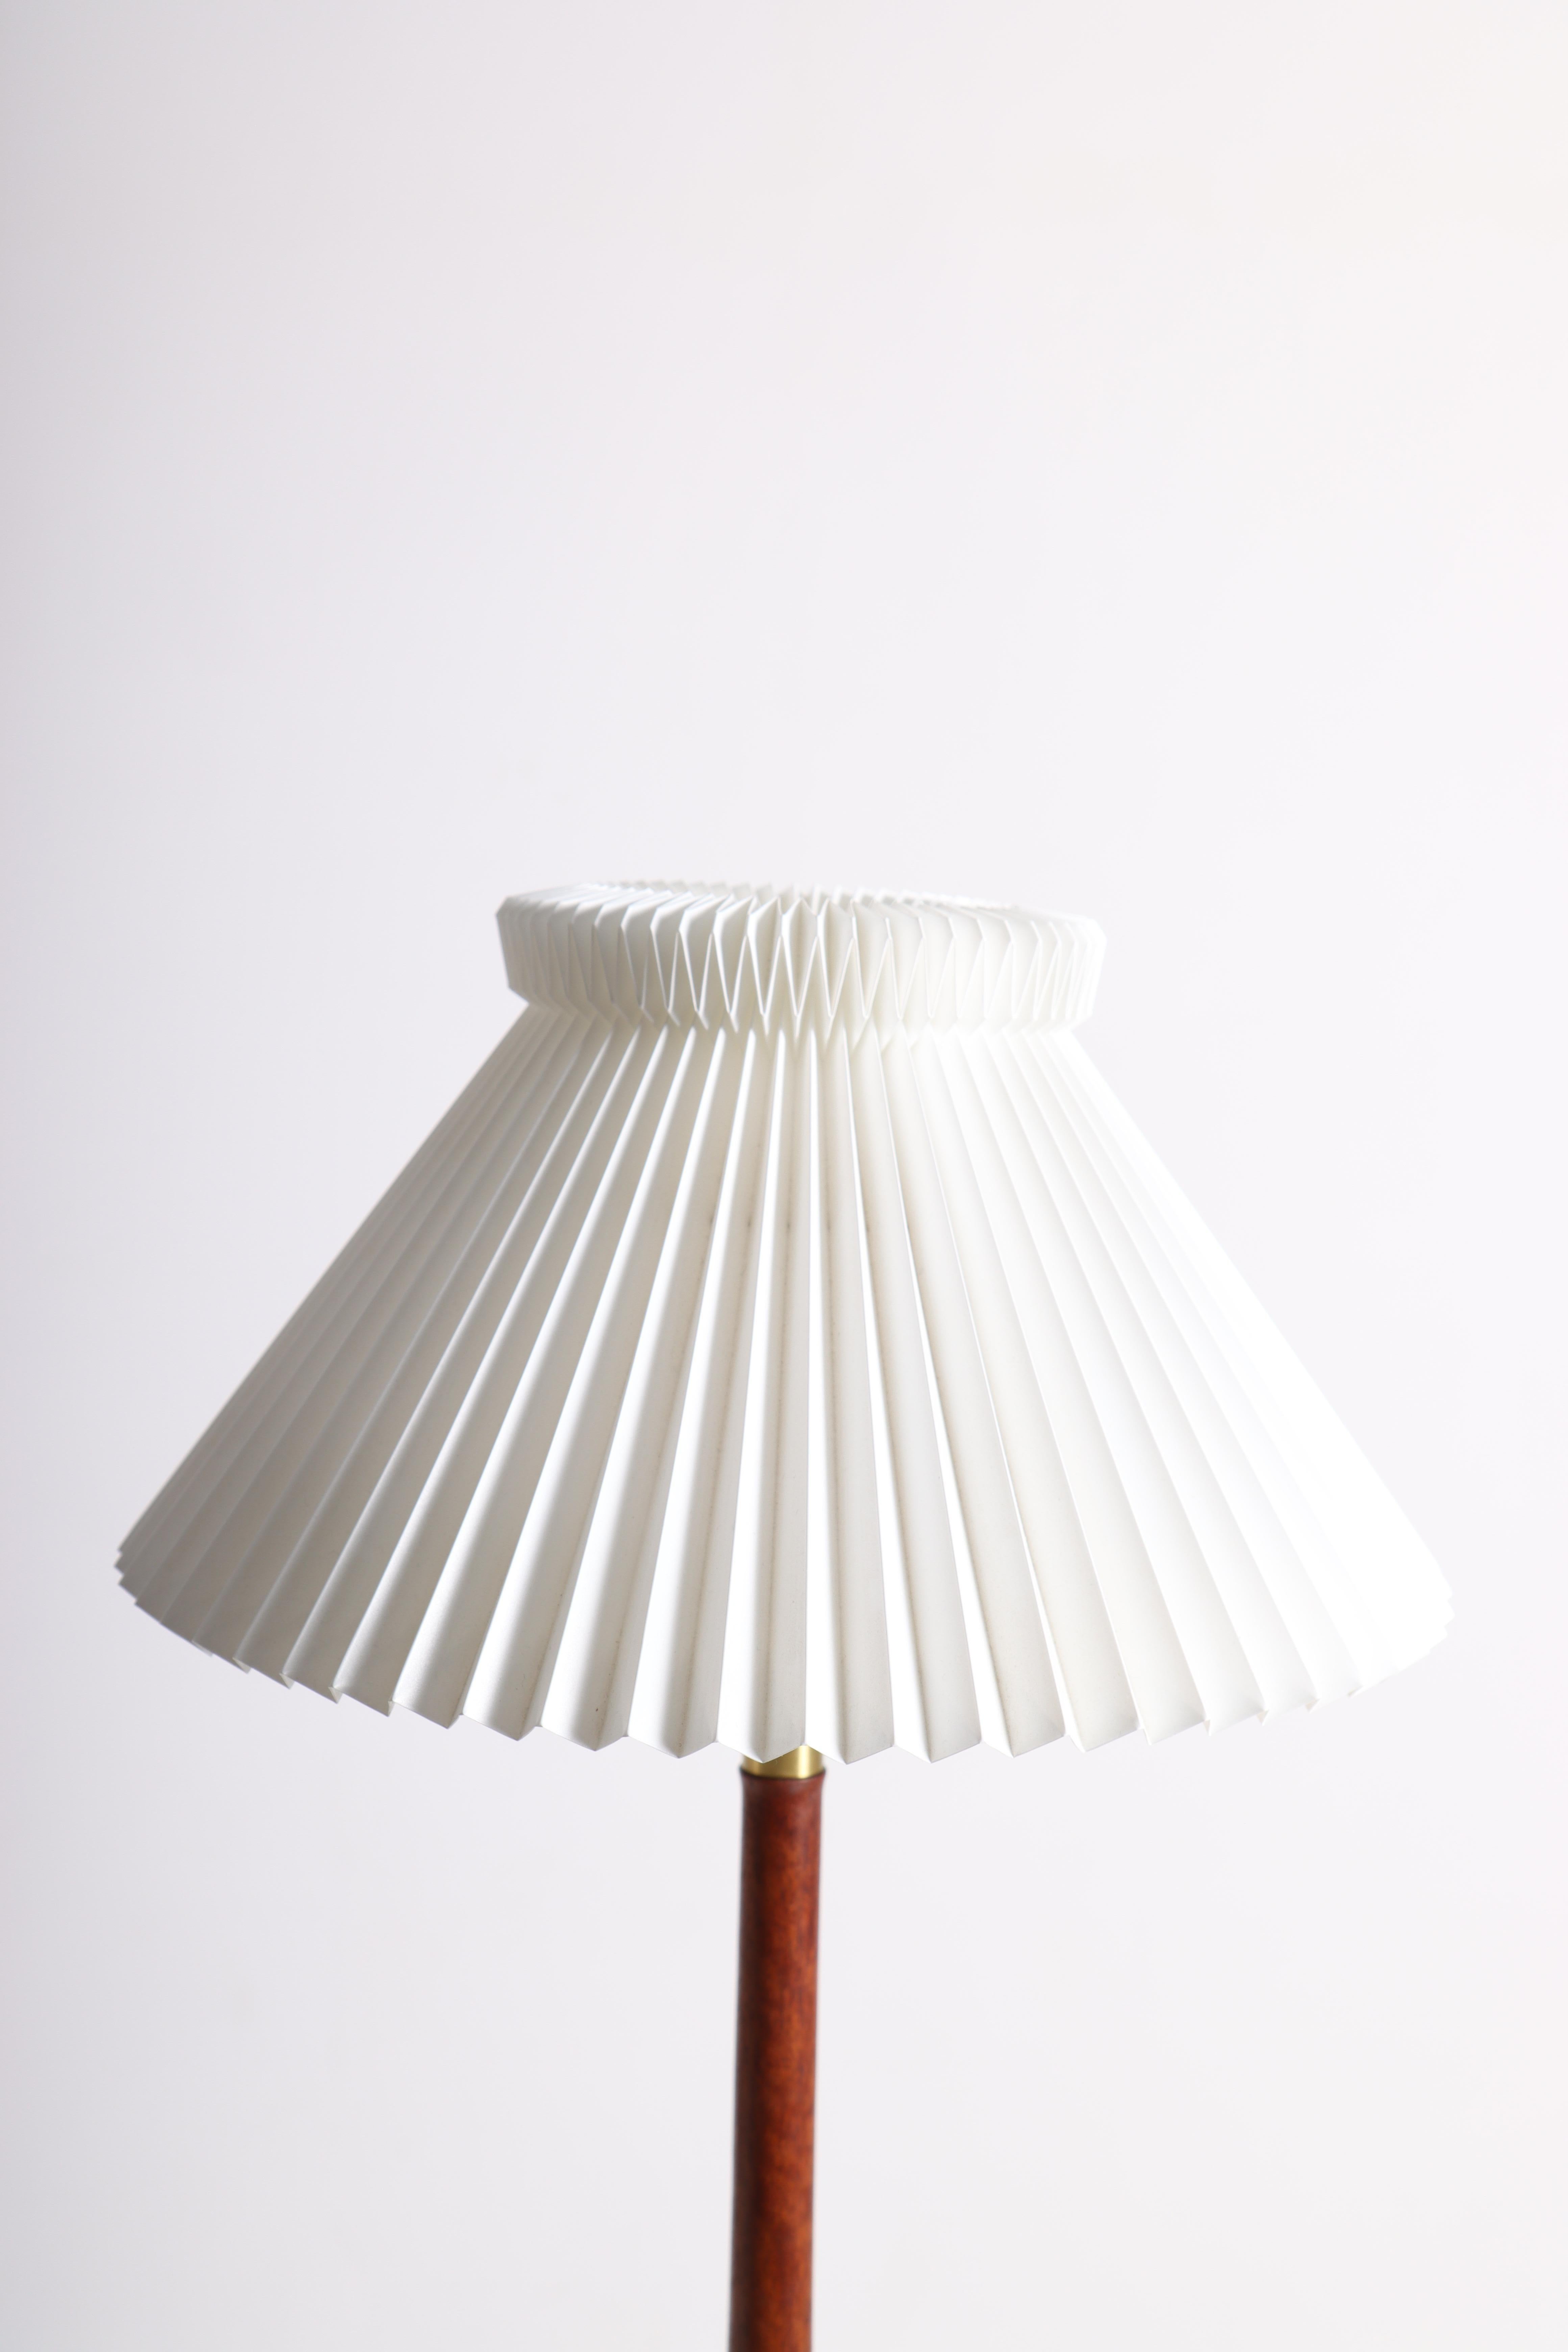 Elegant table lamp in solid mahogany. Designed by Esben Klint and made by Le Klint in the 1950s.